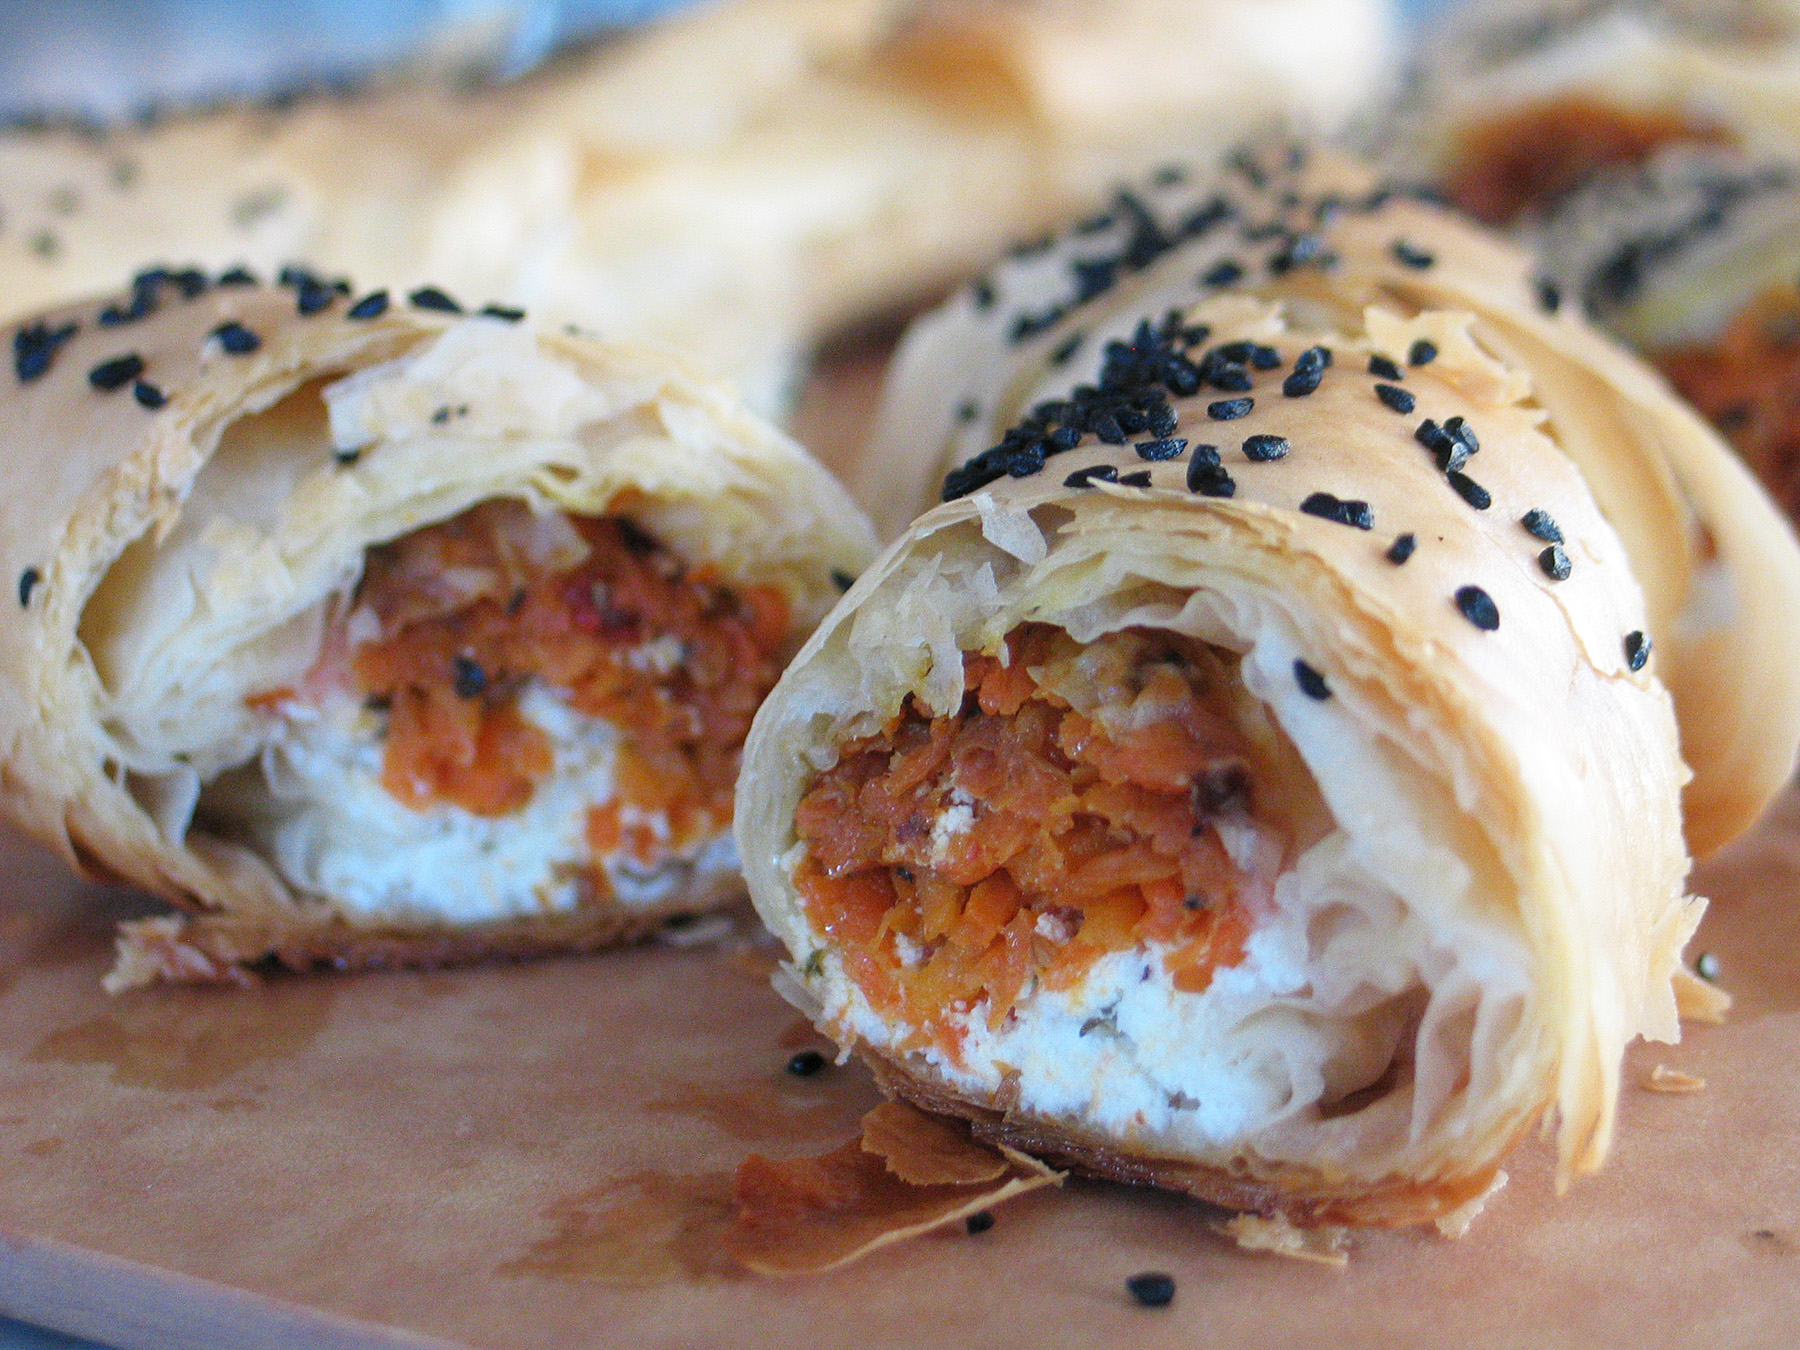 Spiced Carrot and Goat Cheese Strudel